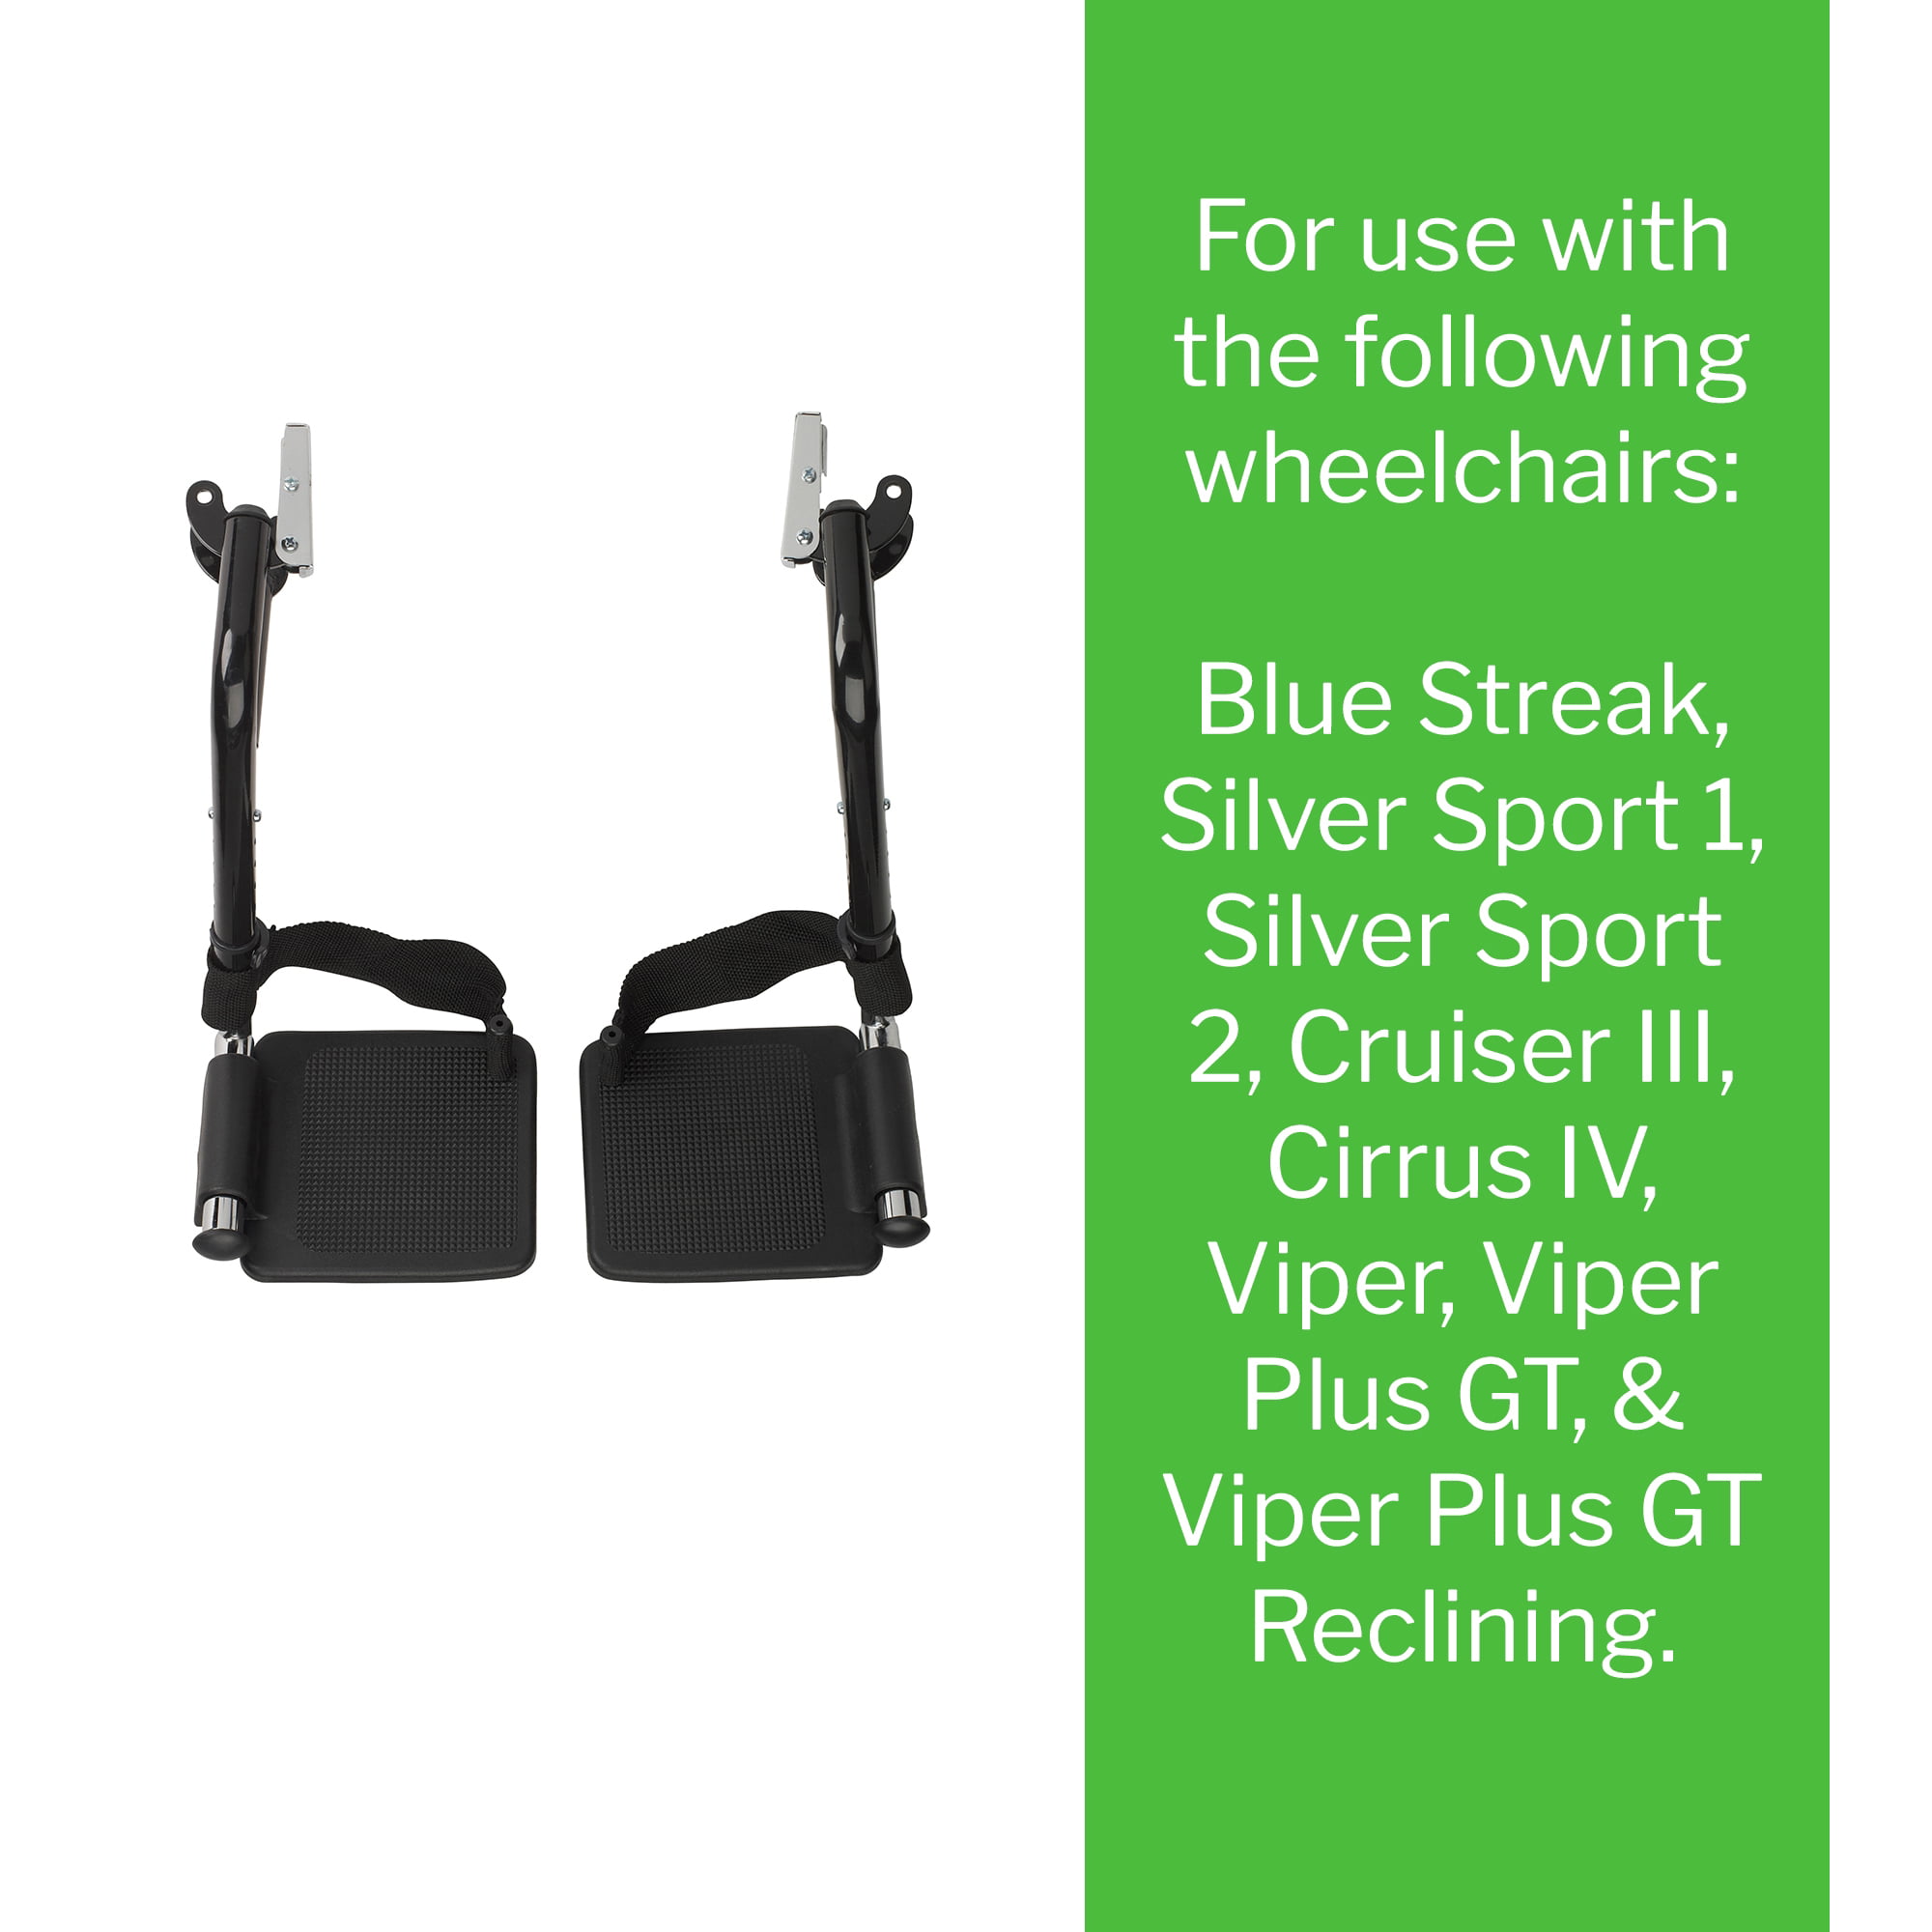 drive Footrest For Wheelchair STDS3J24SF, 1 Pair